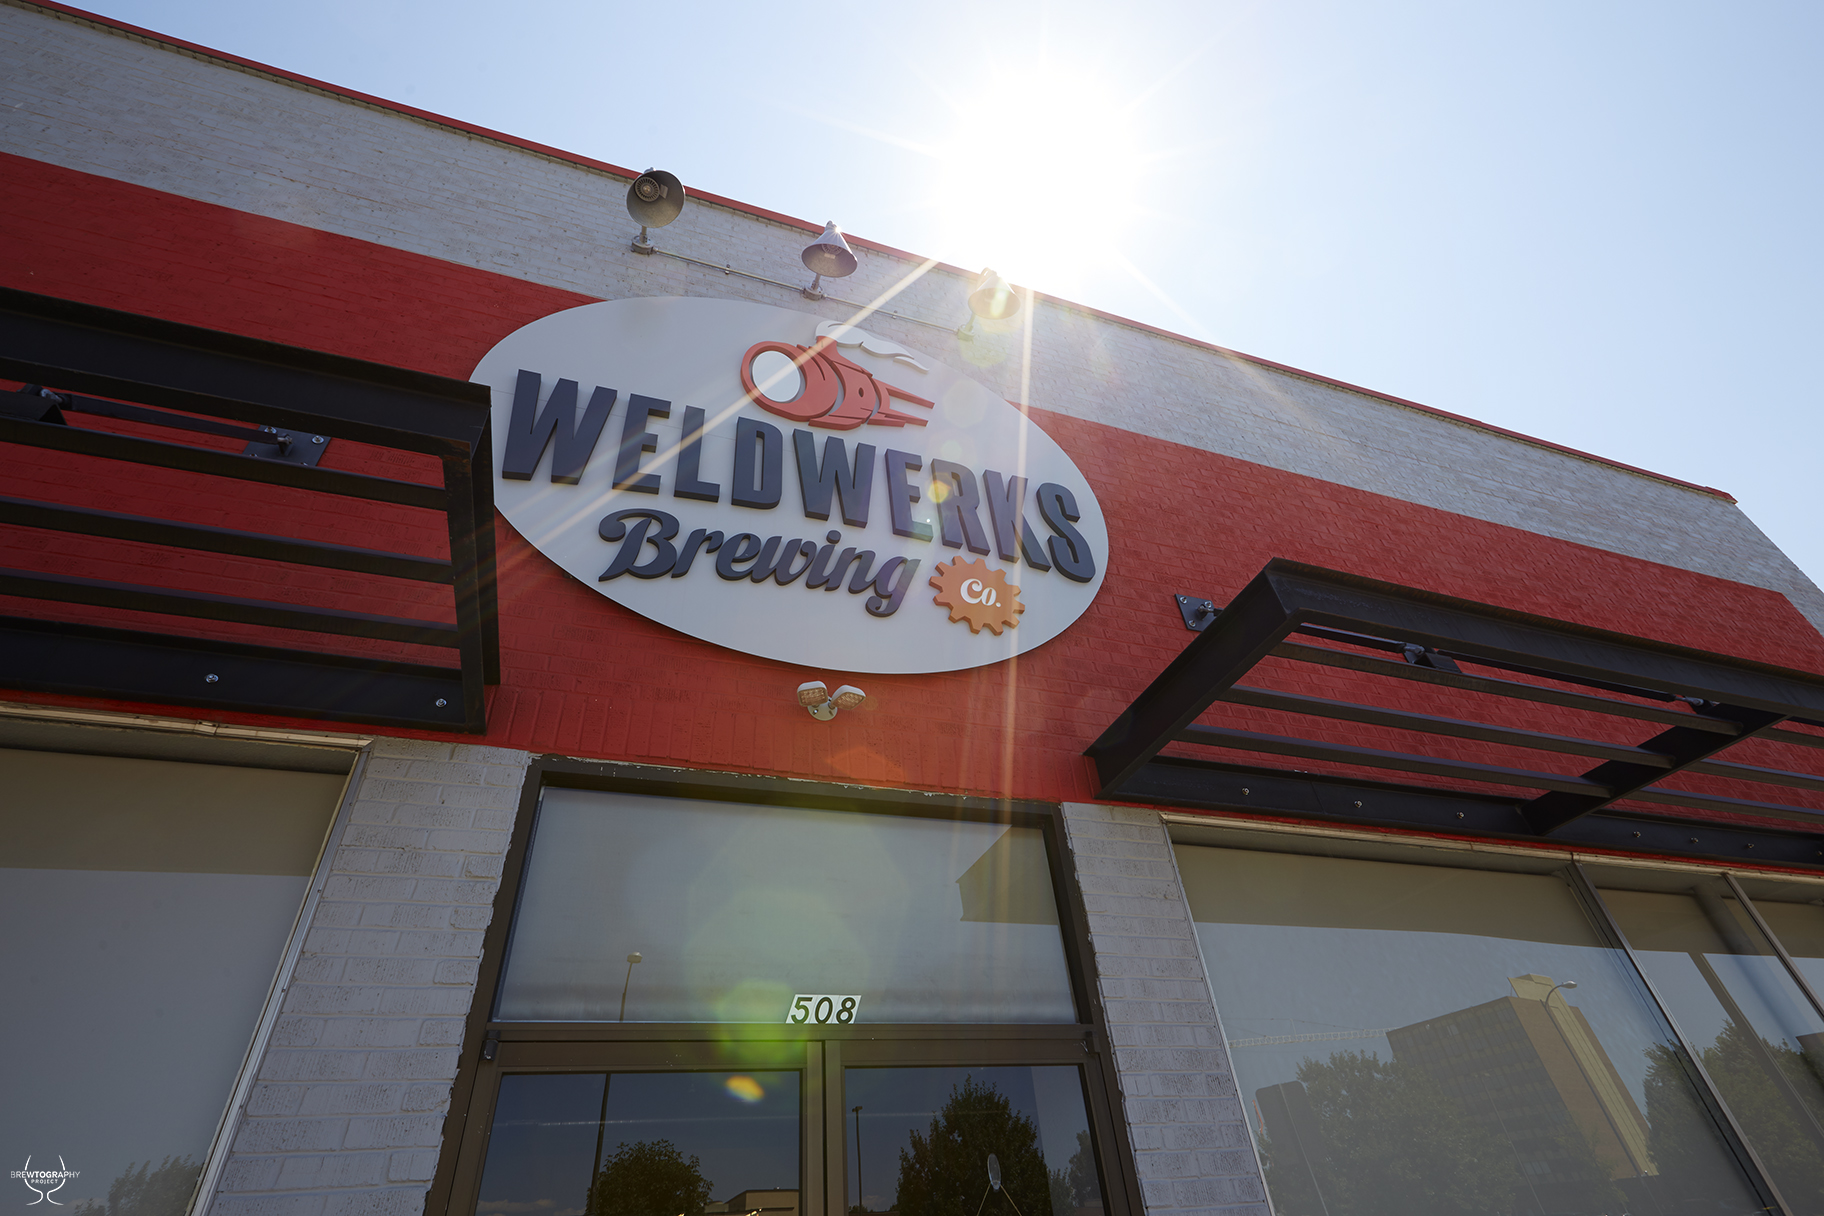 Exterior view of WeldWerks Brewing in Greeley, CO. Photo courtesy of Dustin Hall of Brewtography Proejct.